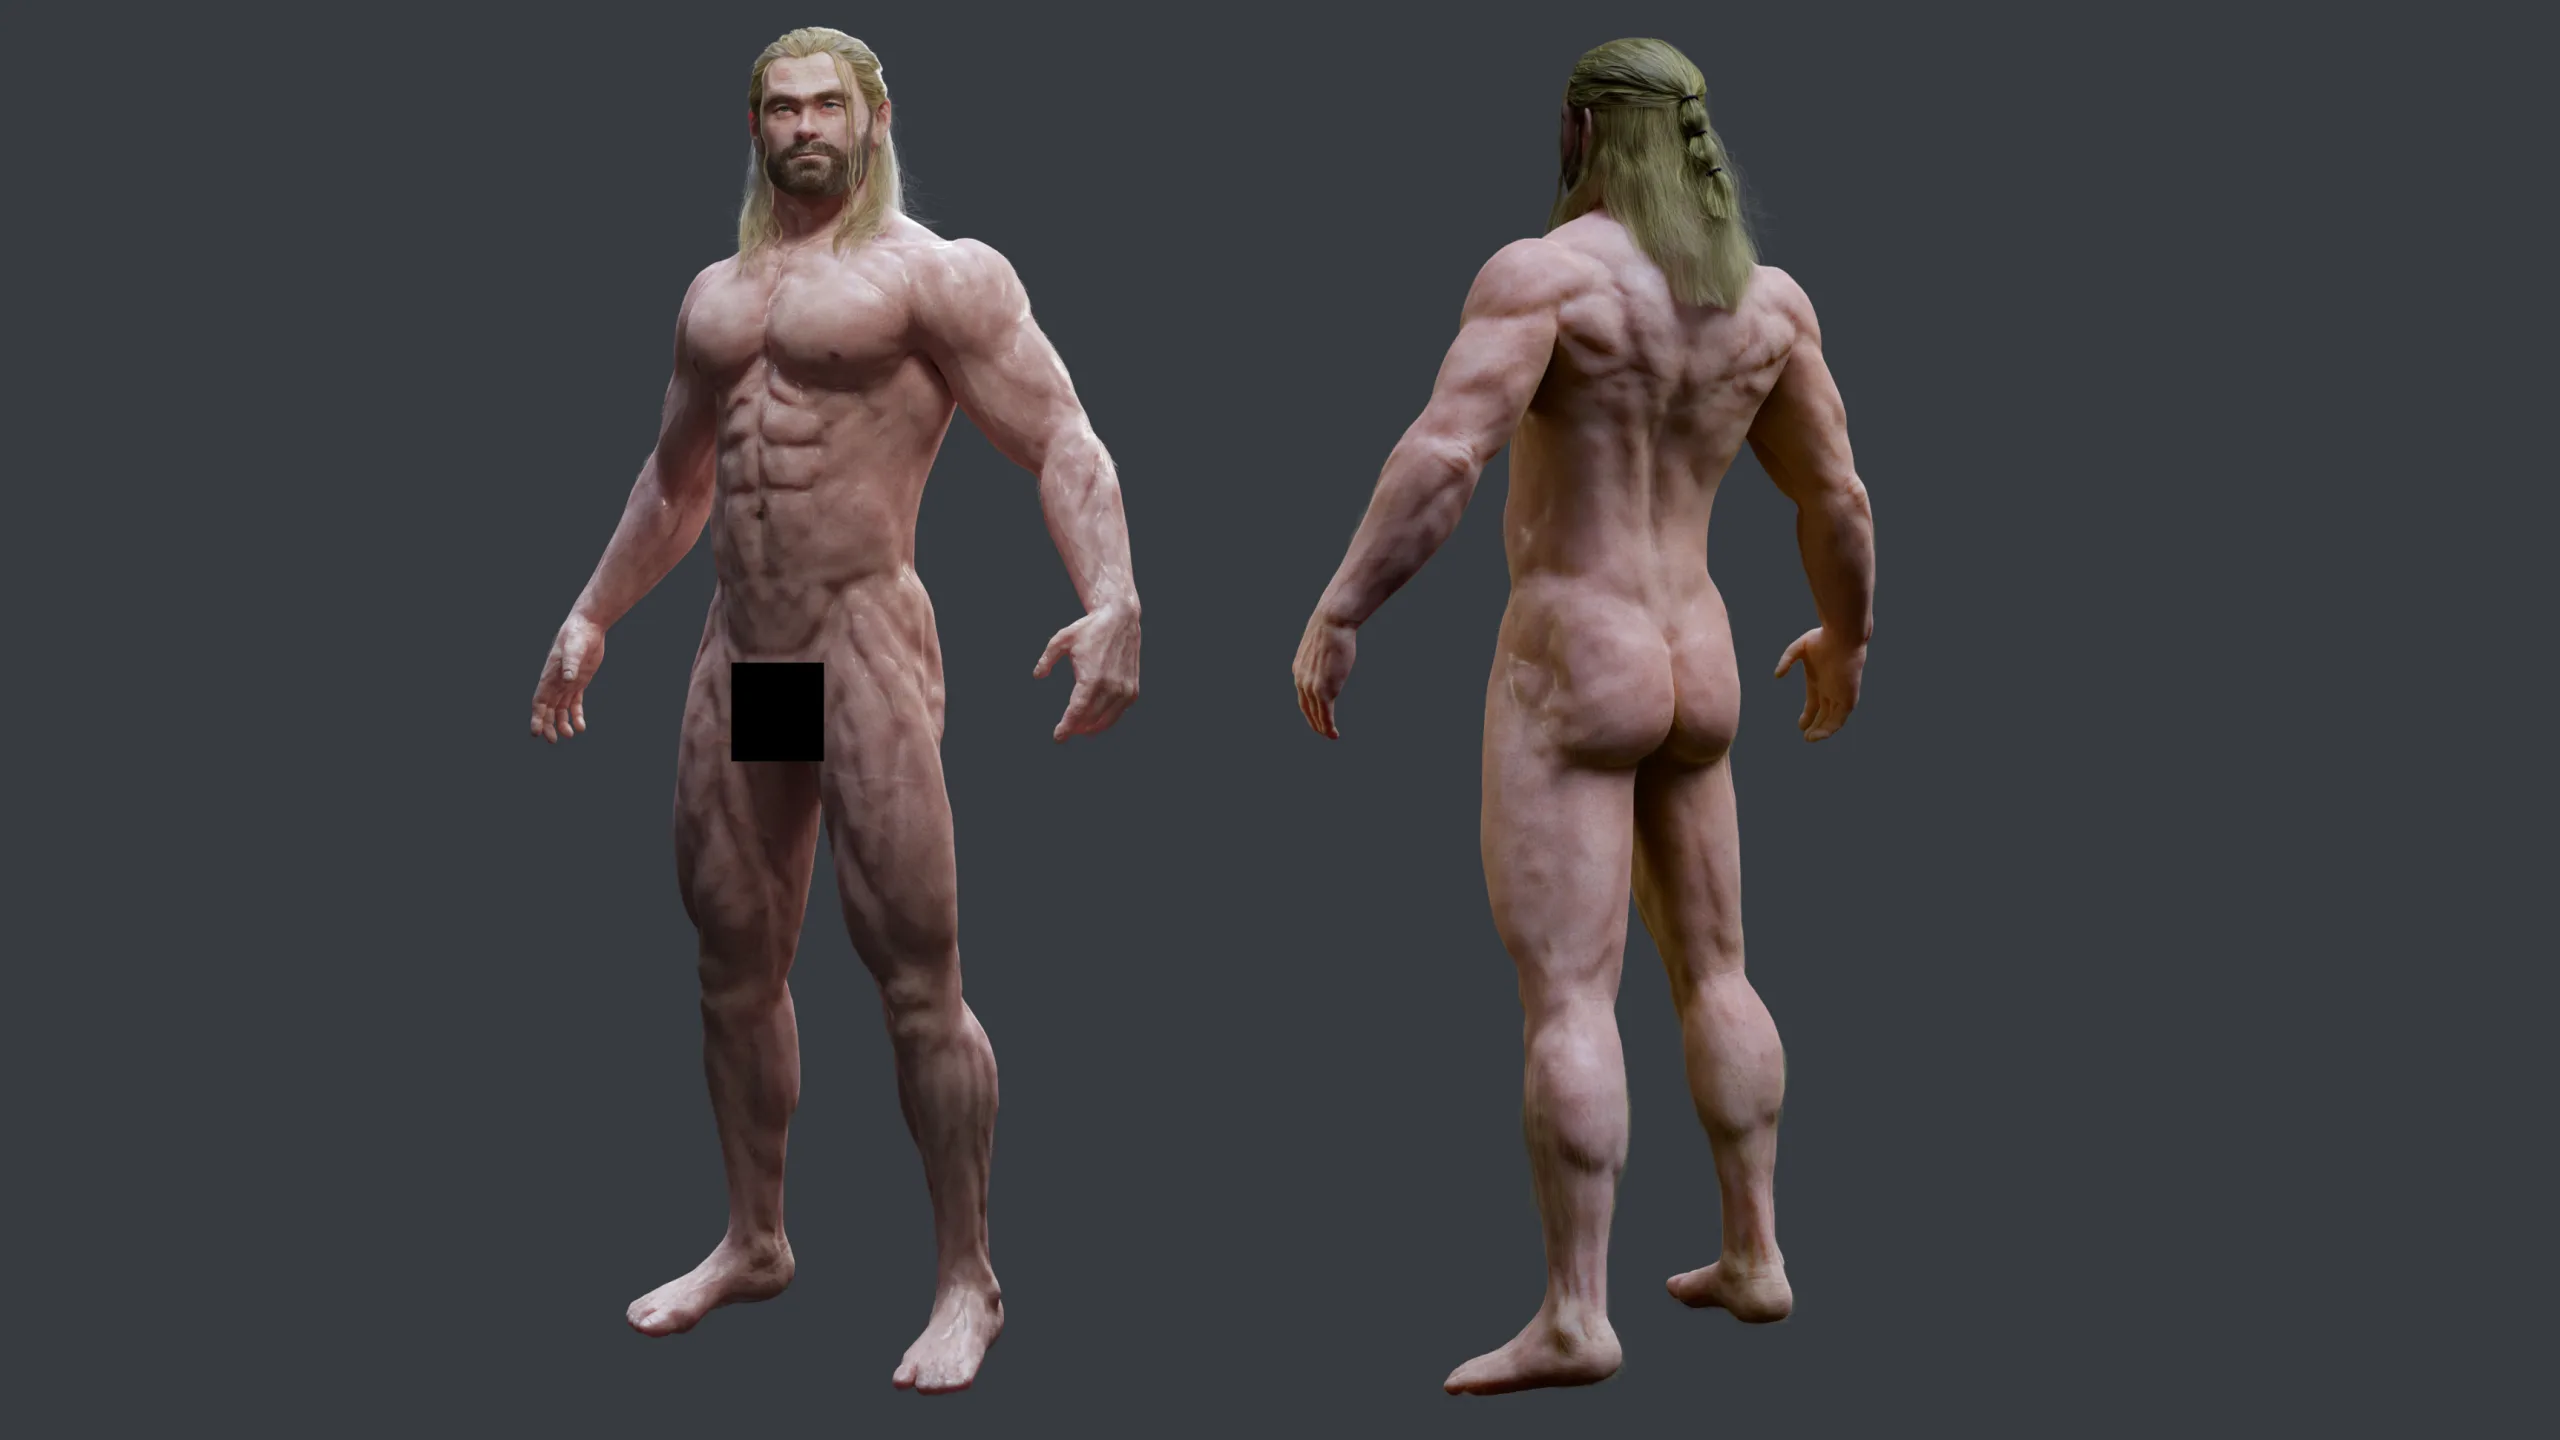 Anatomy & Character Creation in Blender